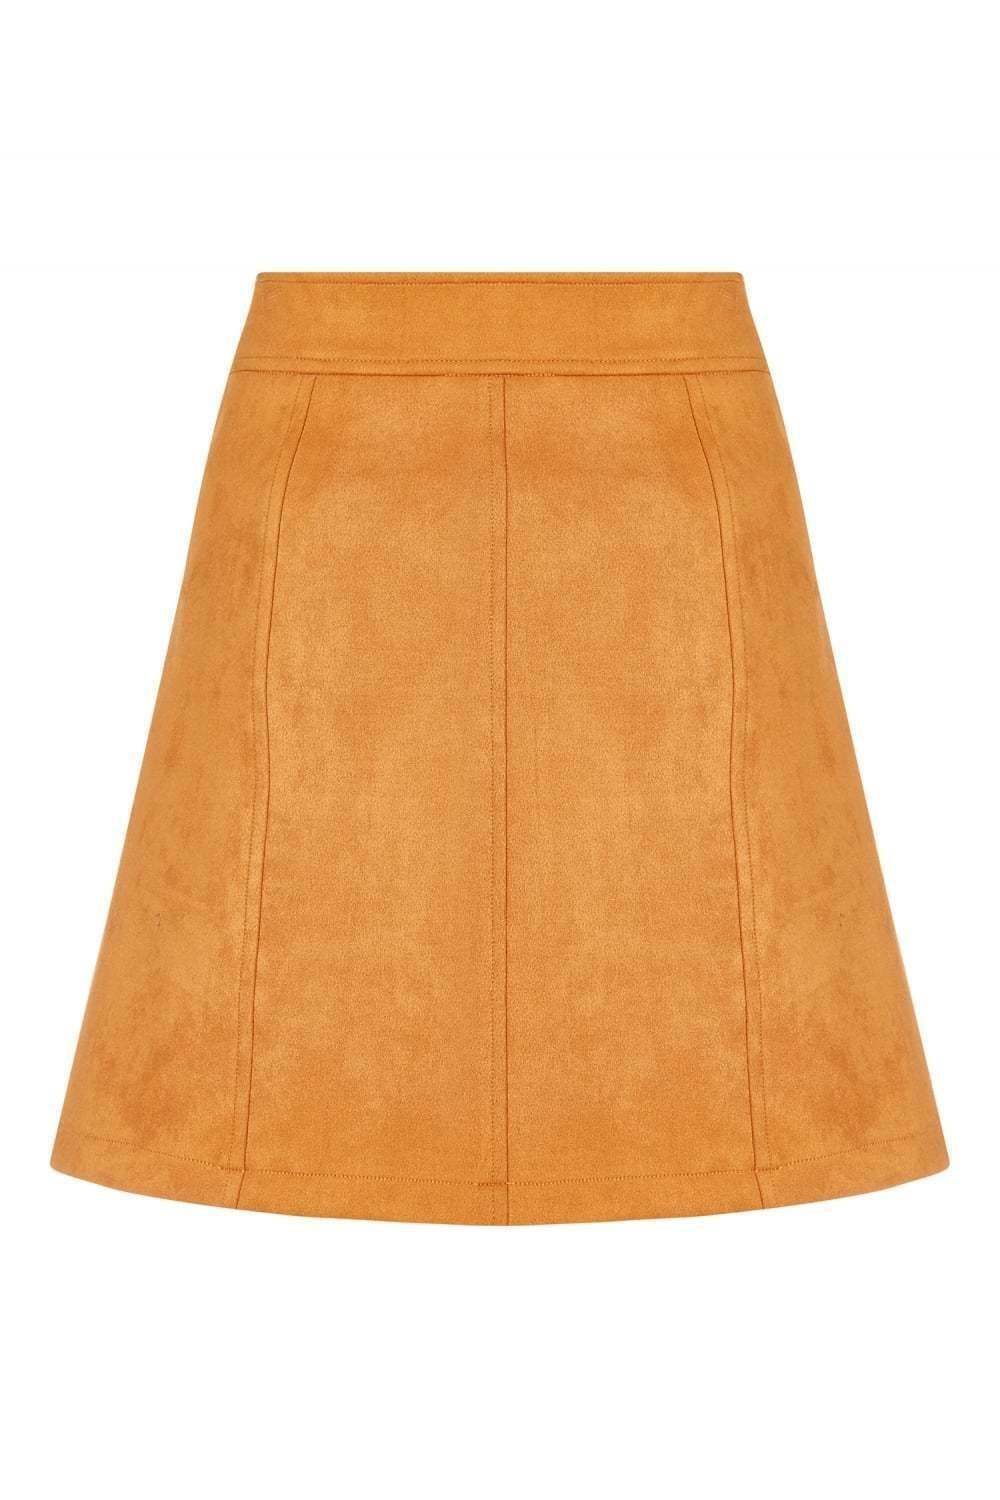 Vintage Button Up Skirt - Back View